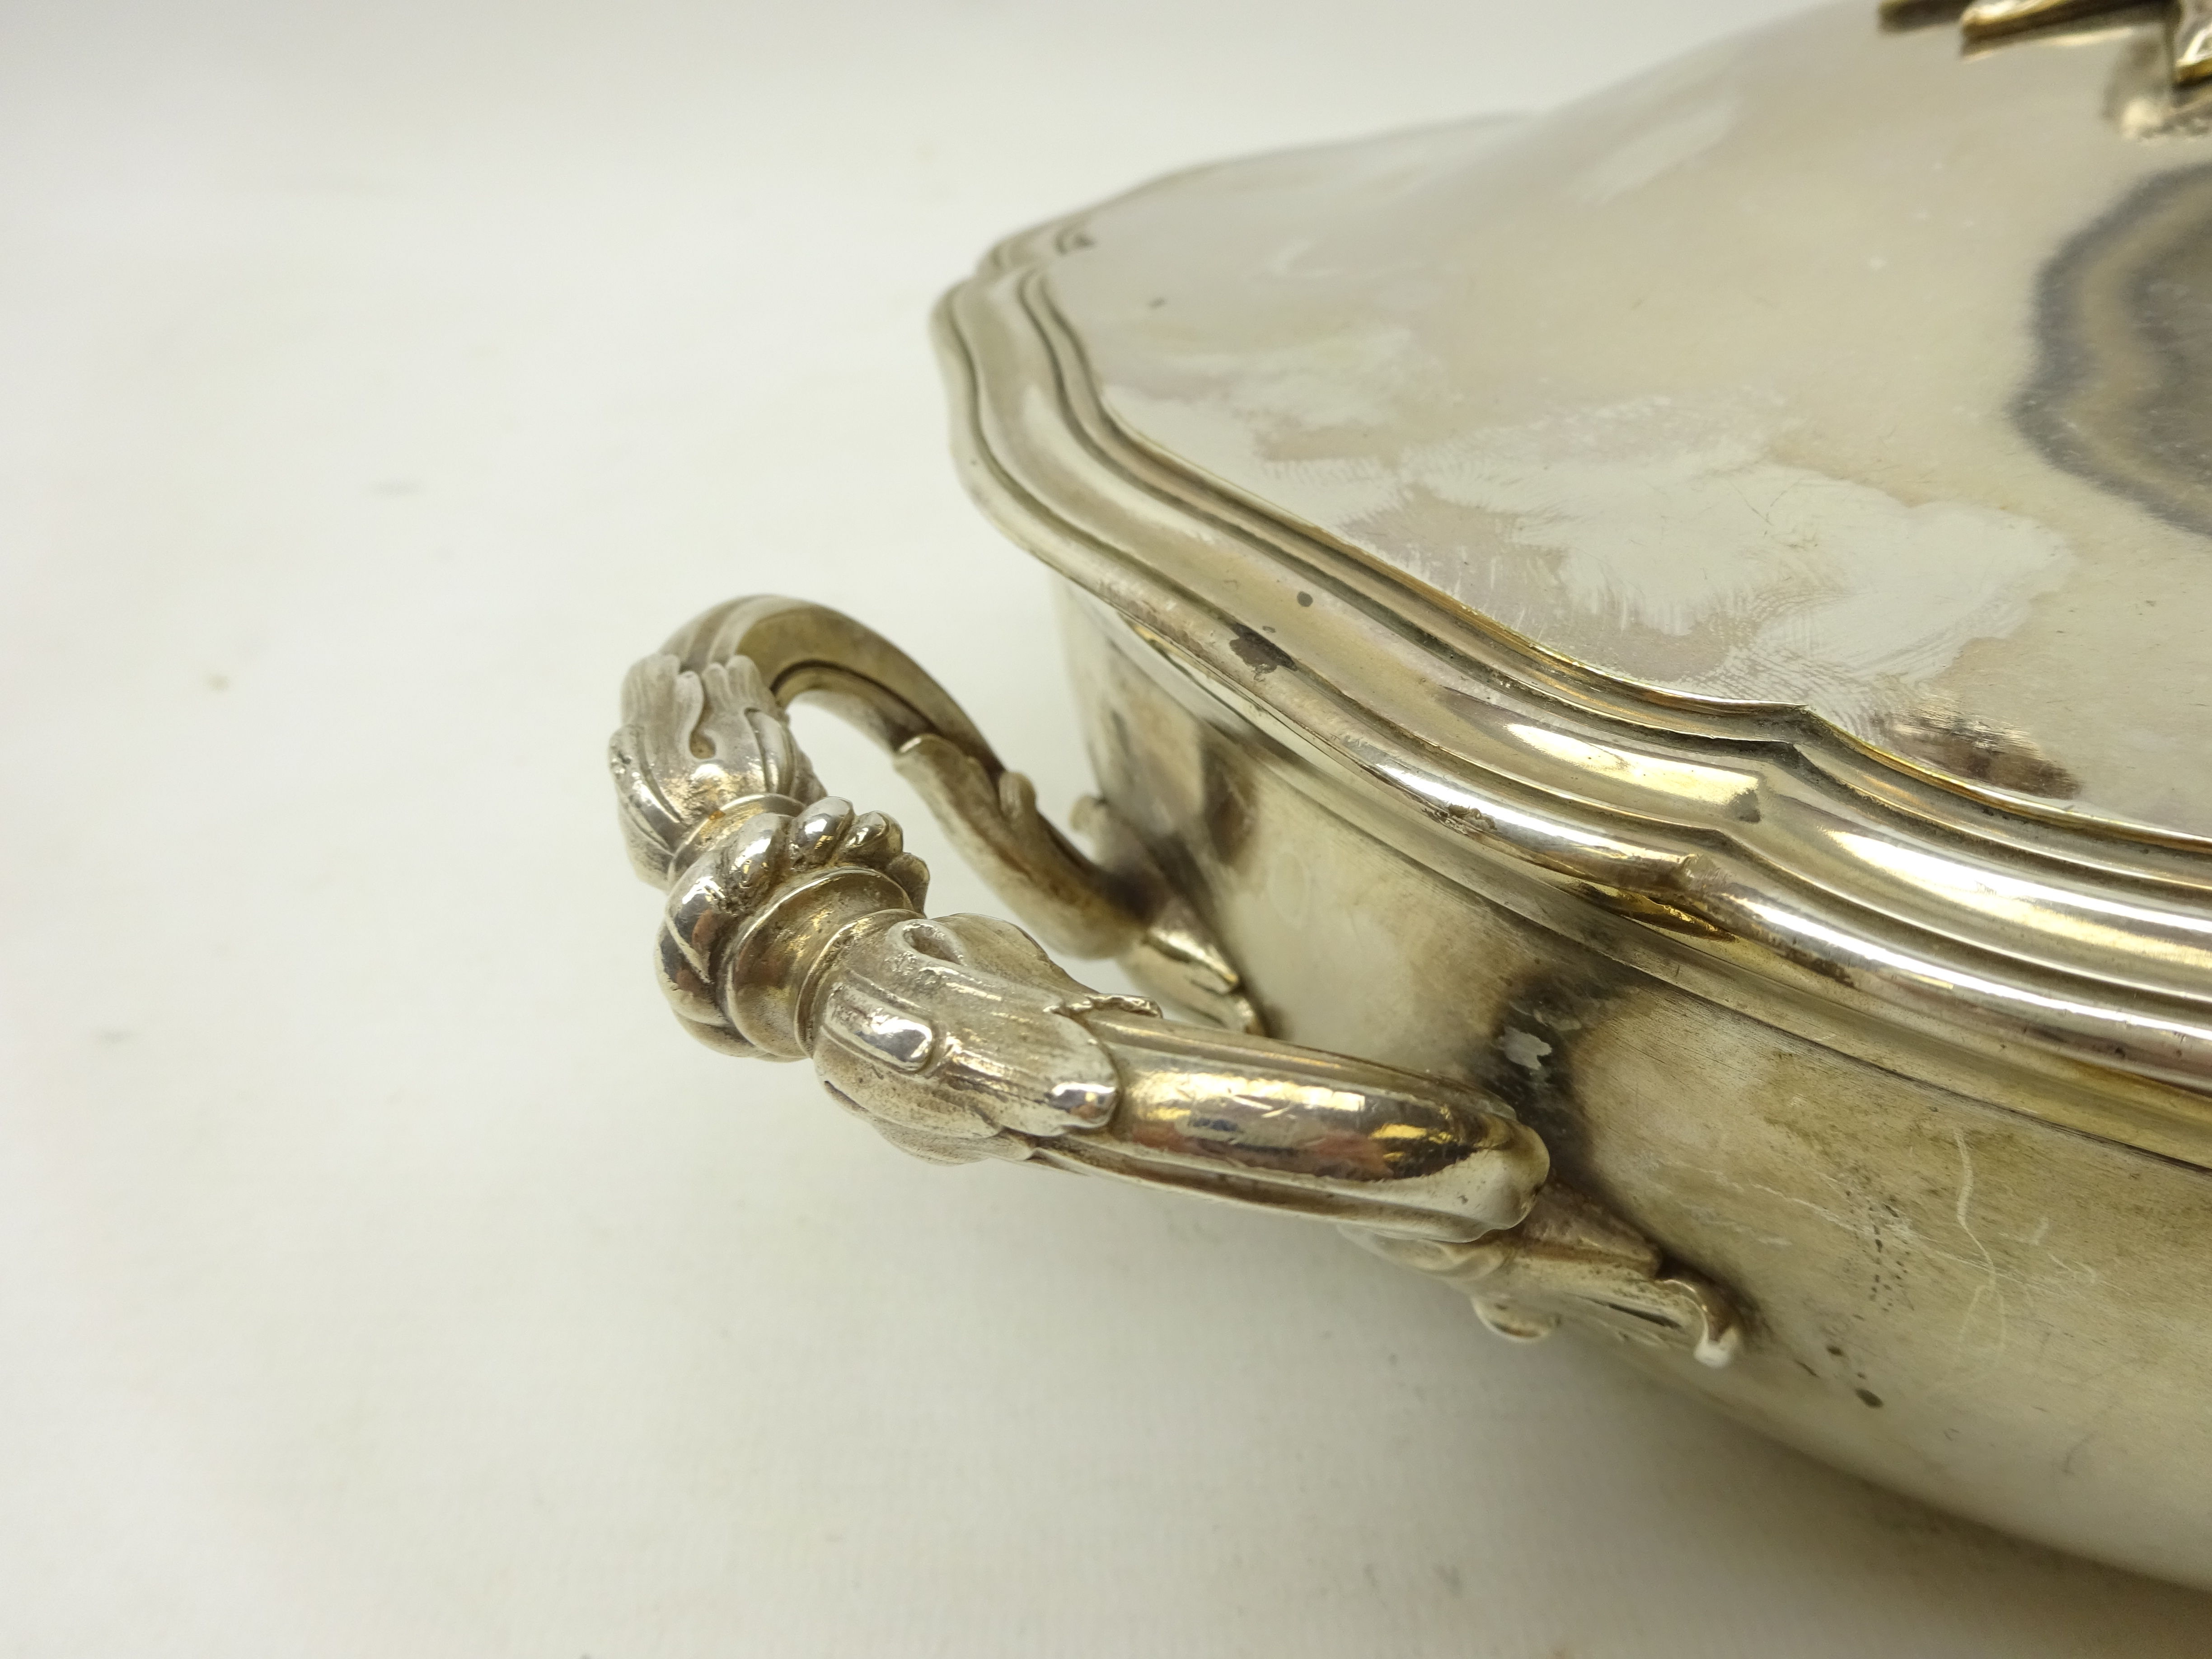 Late 19th century Christofle silver-plated tureen and cover with scalloped edge, - Image 15 of 18